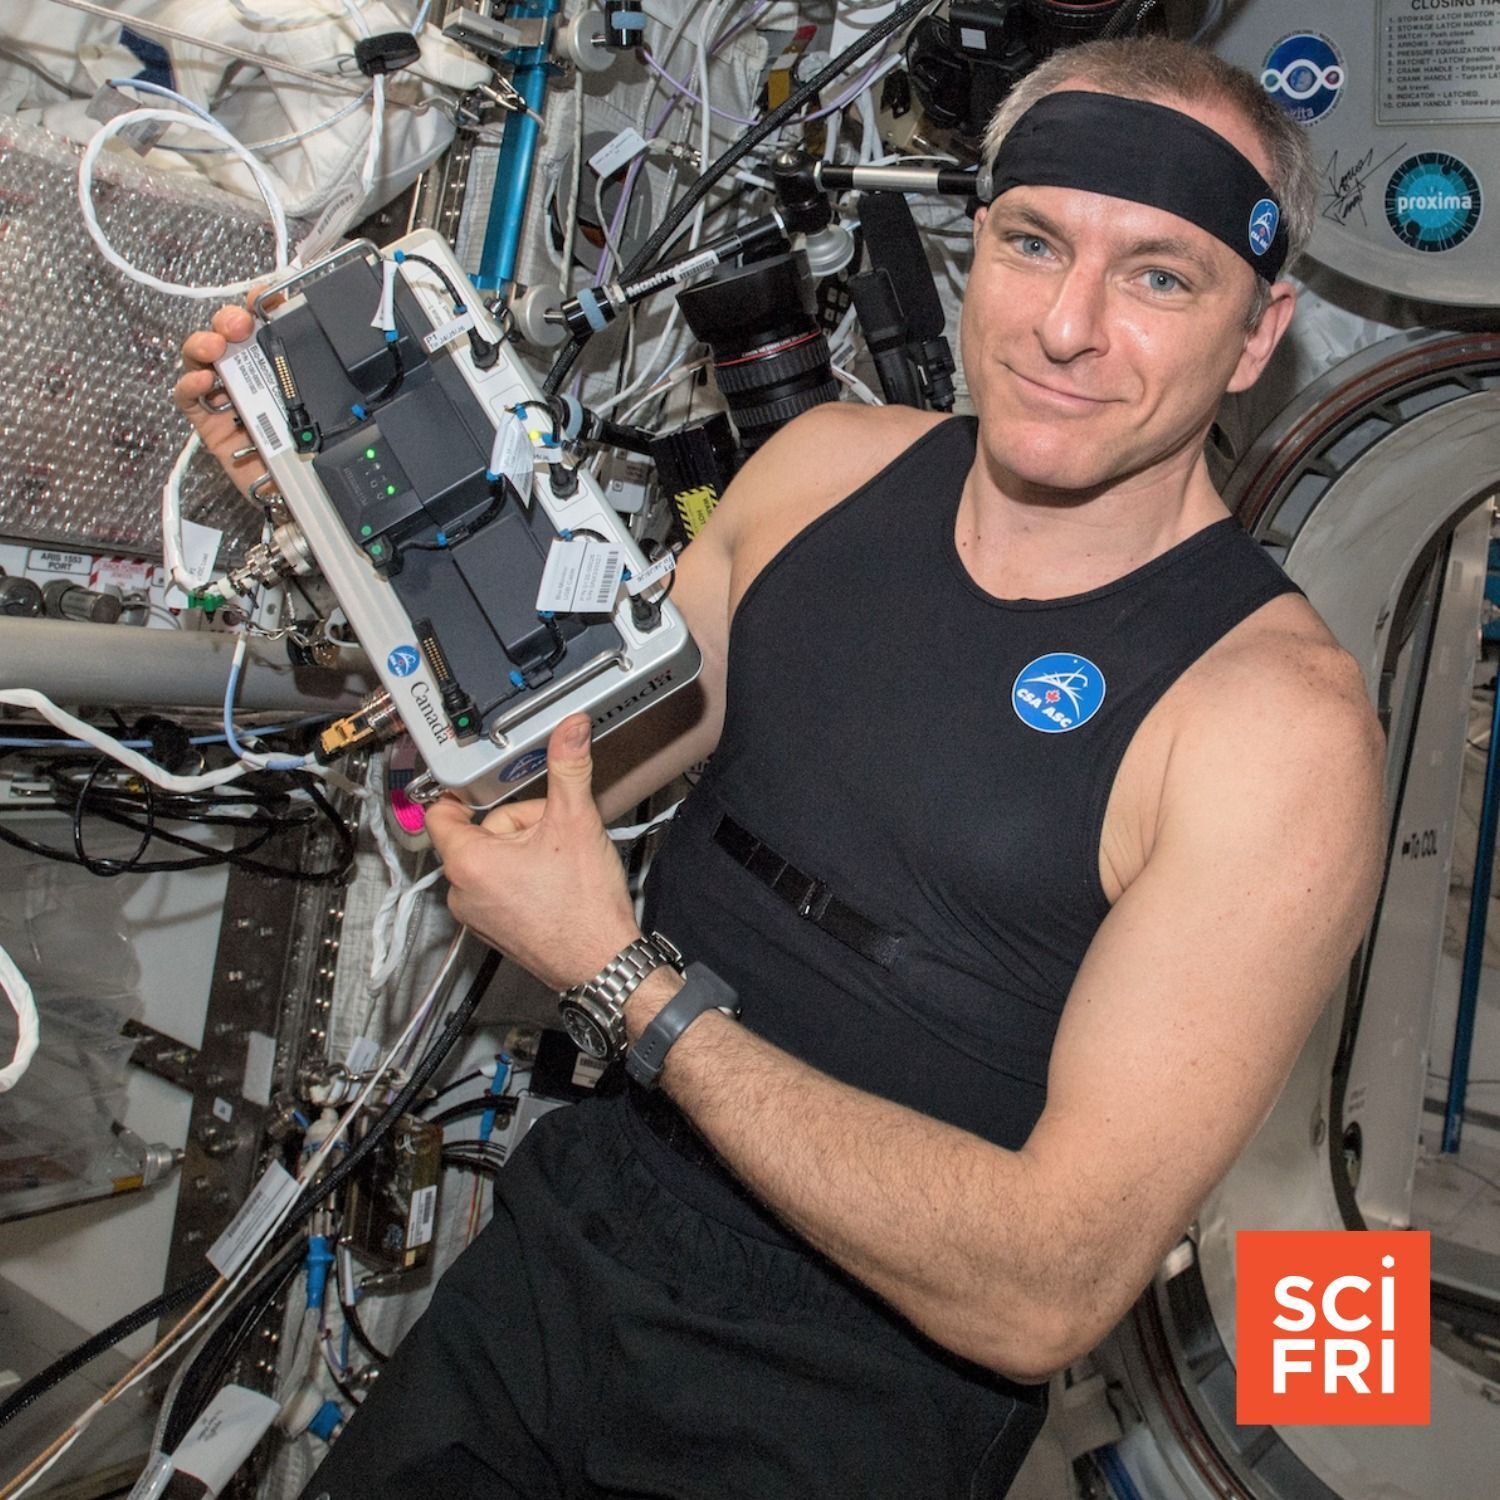 683: To Get Ready For Mars, NASA Studies How The Body Changes In Space